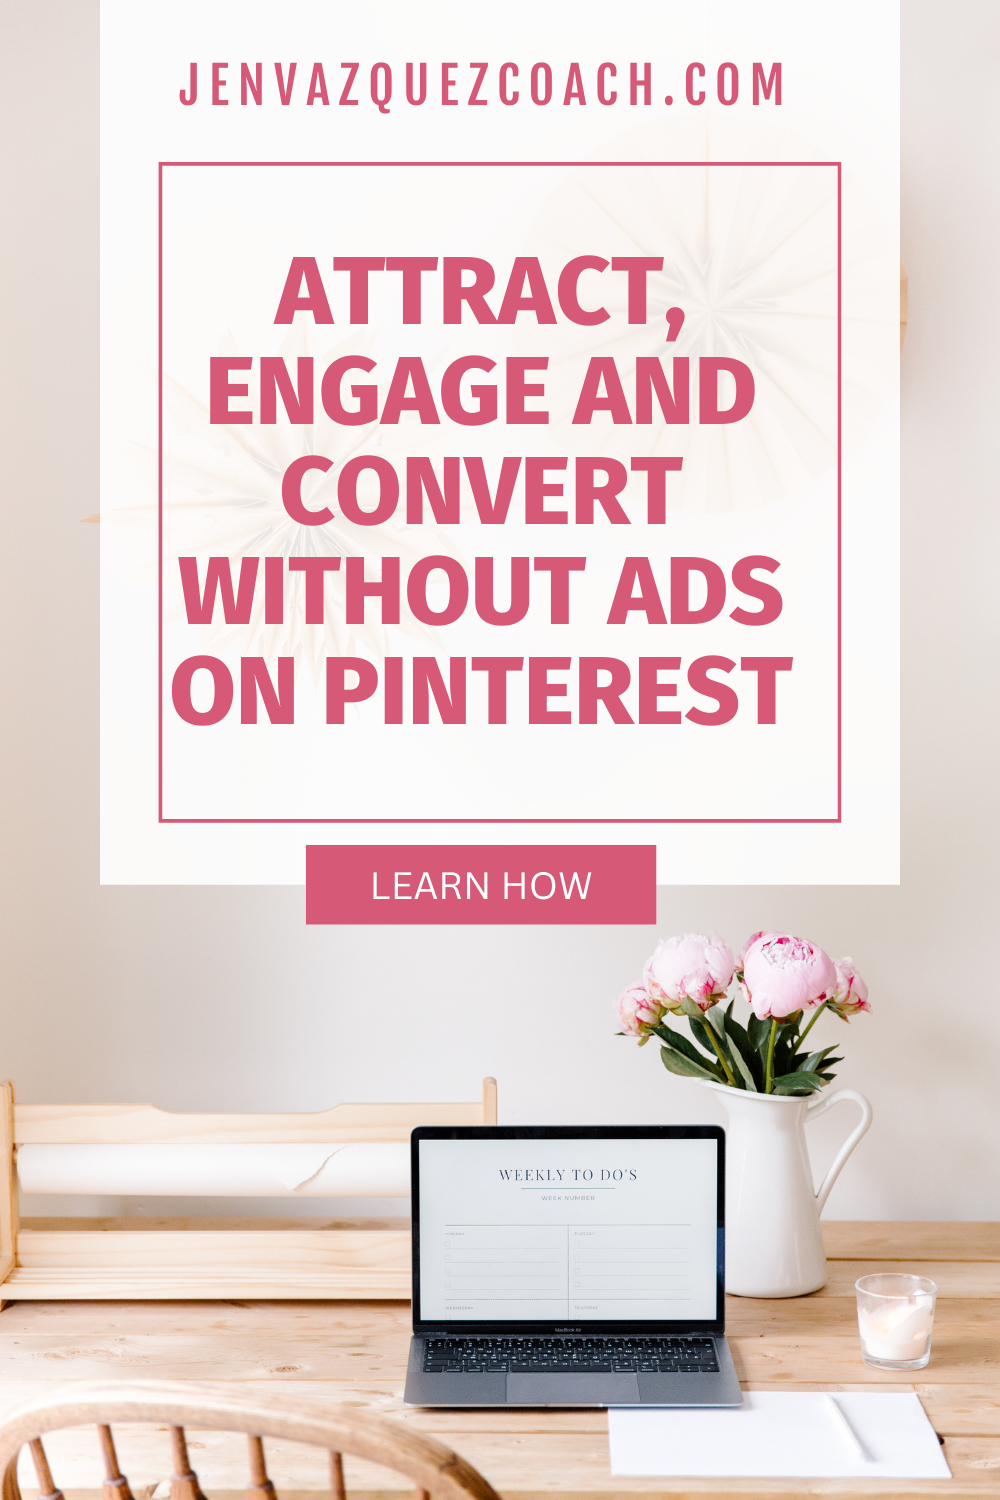 Organic Pinterest Growth Attract, Engage + Convert Without Ads by Jen Vazquez Media Pinterest Manager